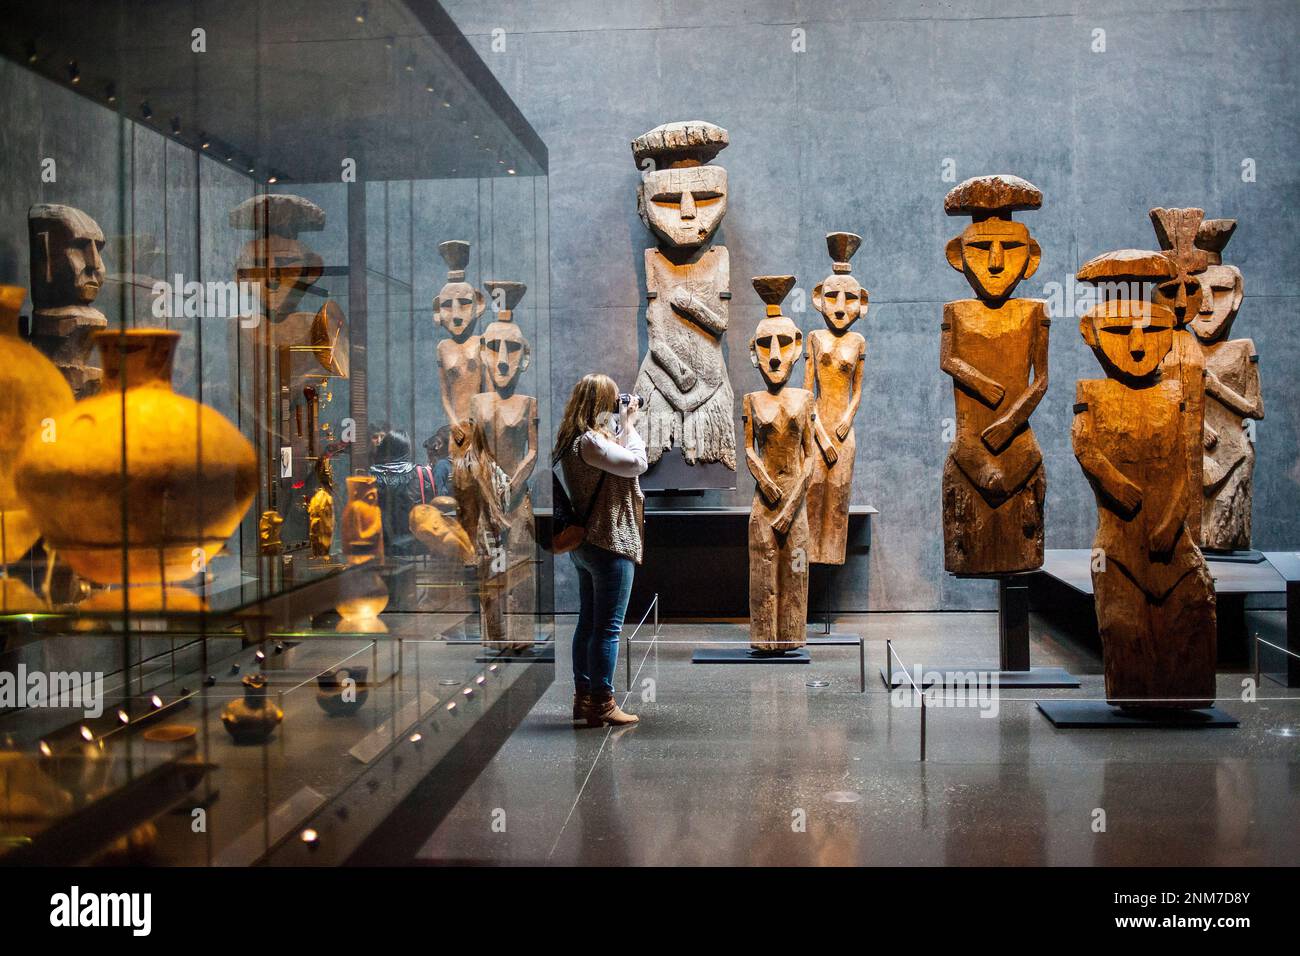 Chilean Museum of Pre-Columbian Art. Chemamulles, Mapuche funerary statues, Sala Chile antes de ser Chile (Chile before Chile Hall), Santiago. Chile Stock Photo